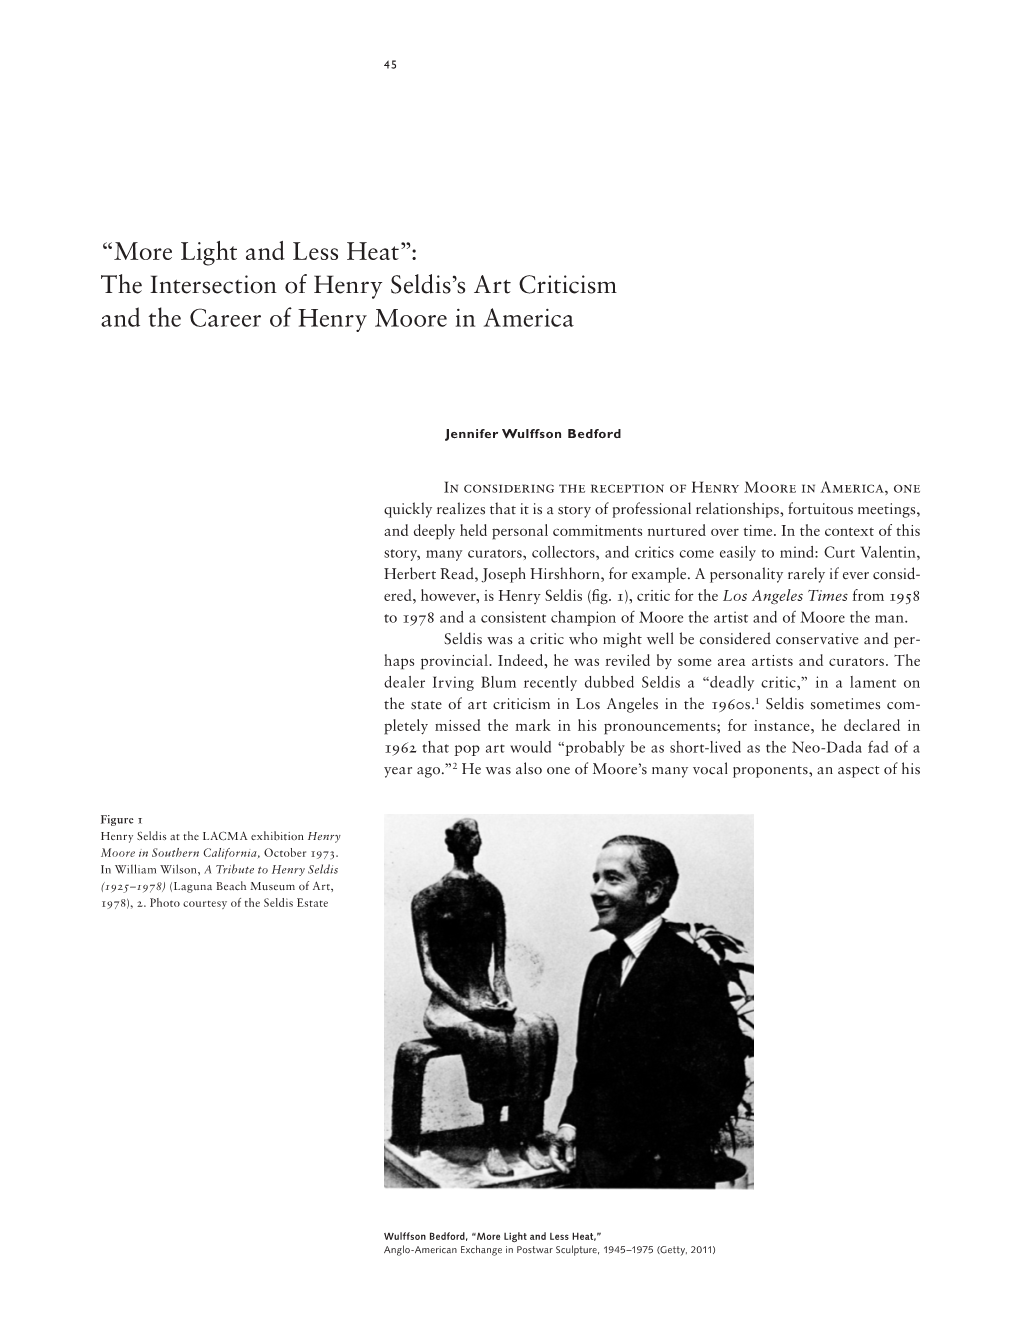 “More Light and Less Heat”: the Intersection of Henry Seldis's Art Criticism and the Career of Henry Moore in America